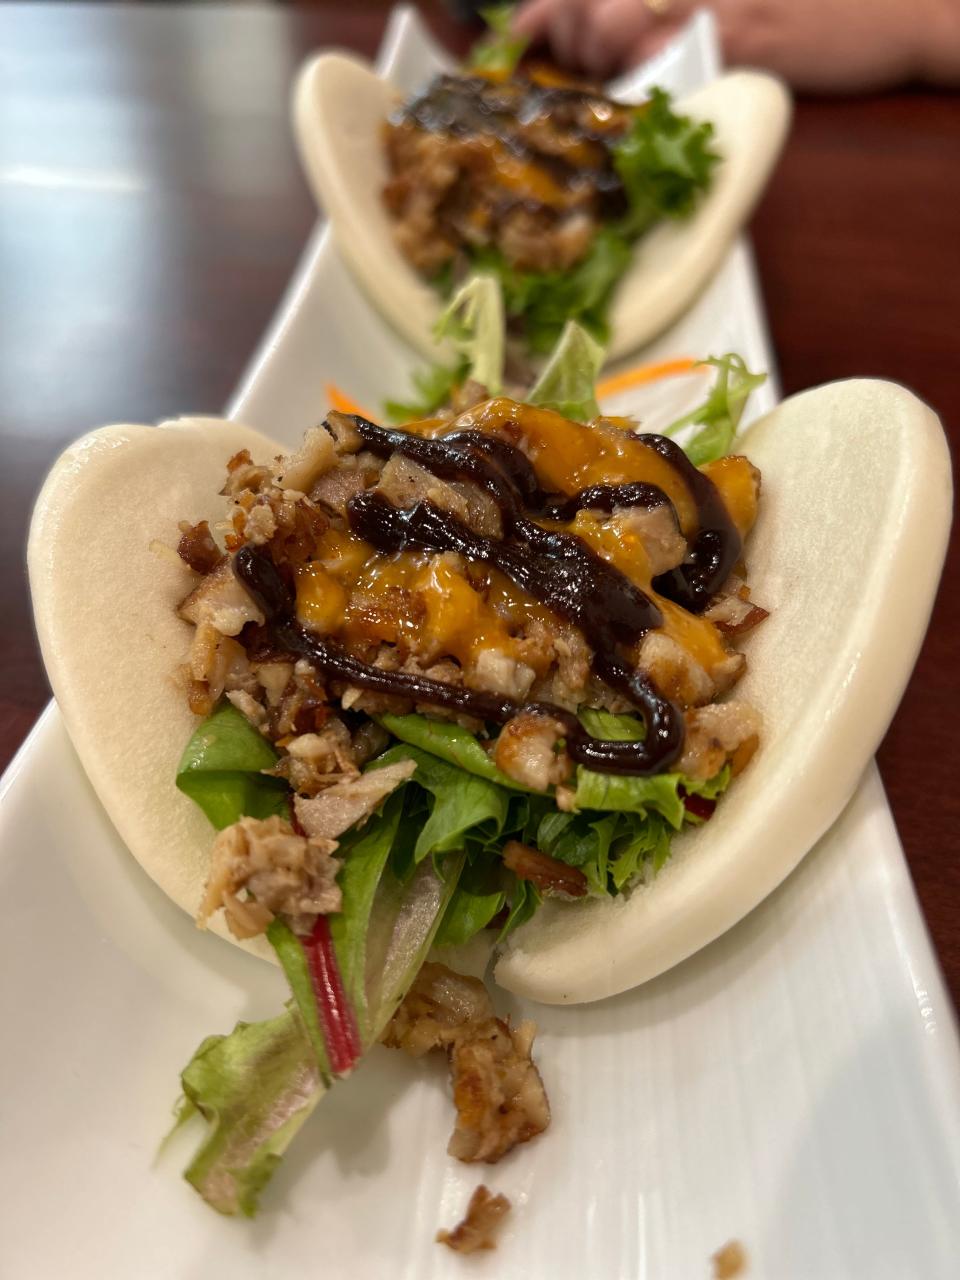 Moo shu pork belly buns are two soft bao buns with pork belly, spring mix greens and spicy mayo.